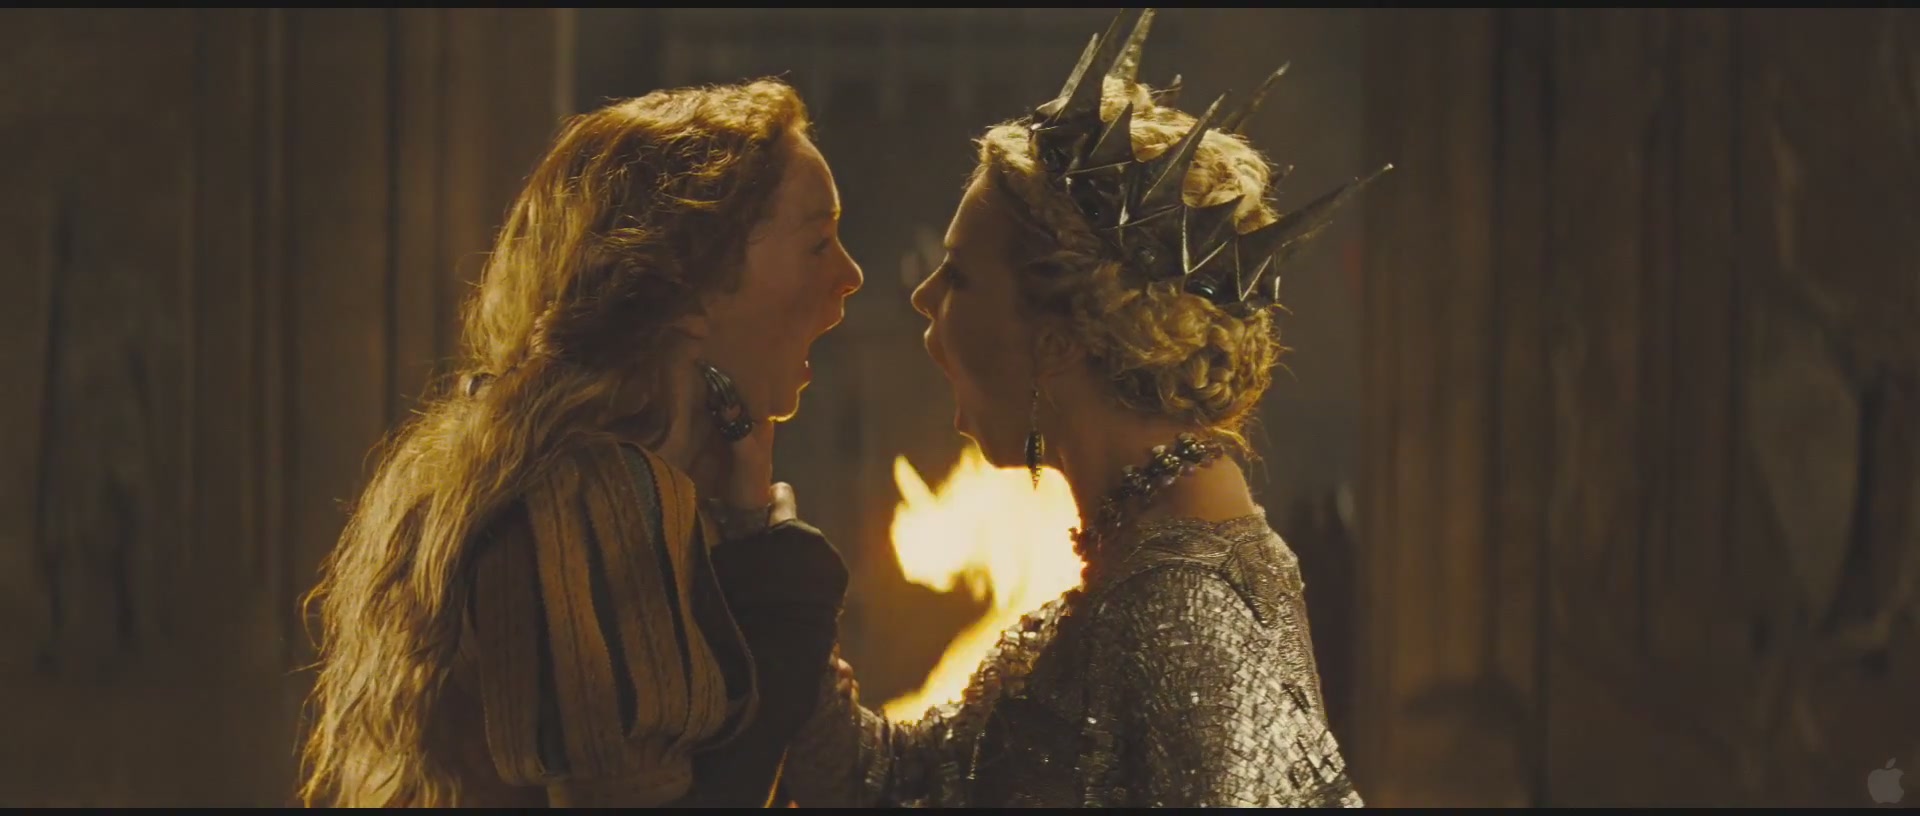 Snow White and the Huntsman official Trailer 1 charlize theron 26721314 1920 816